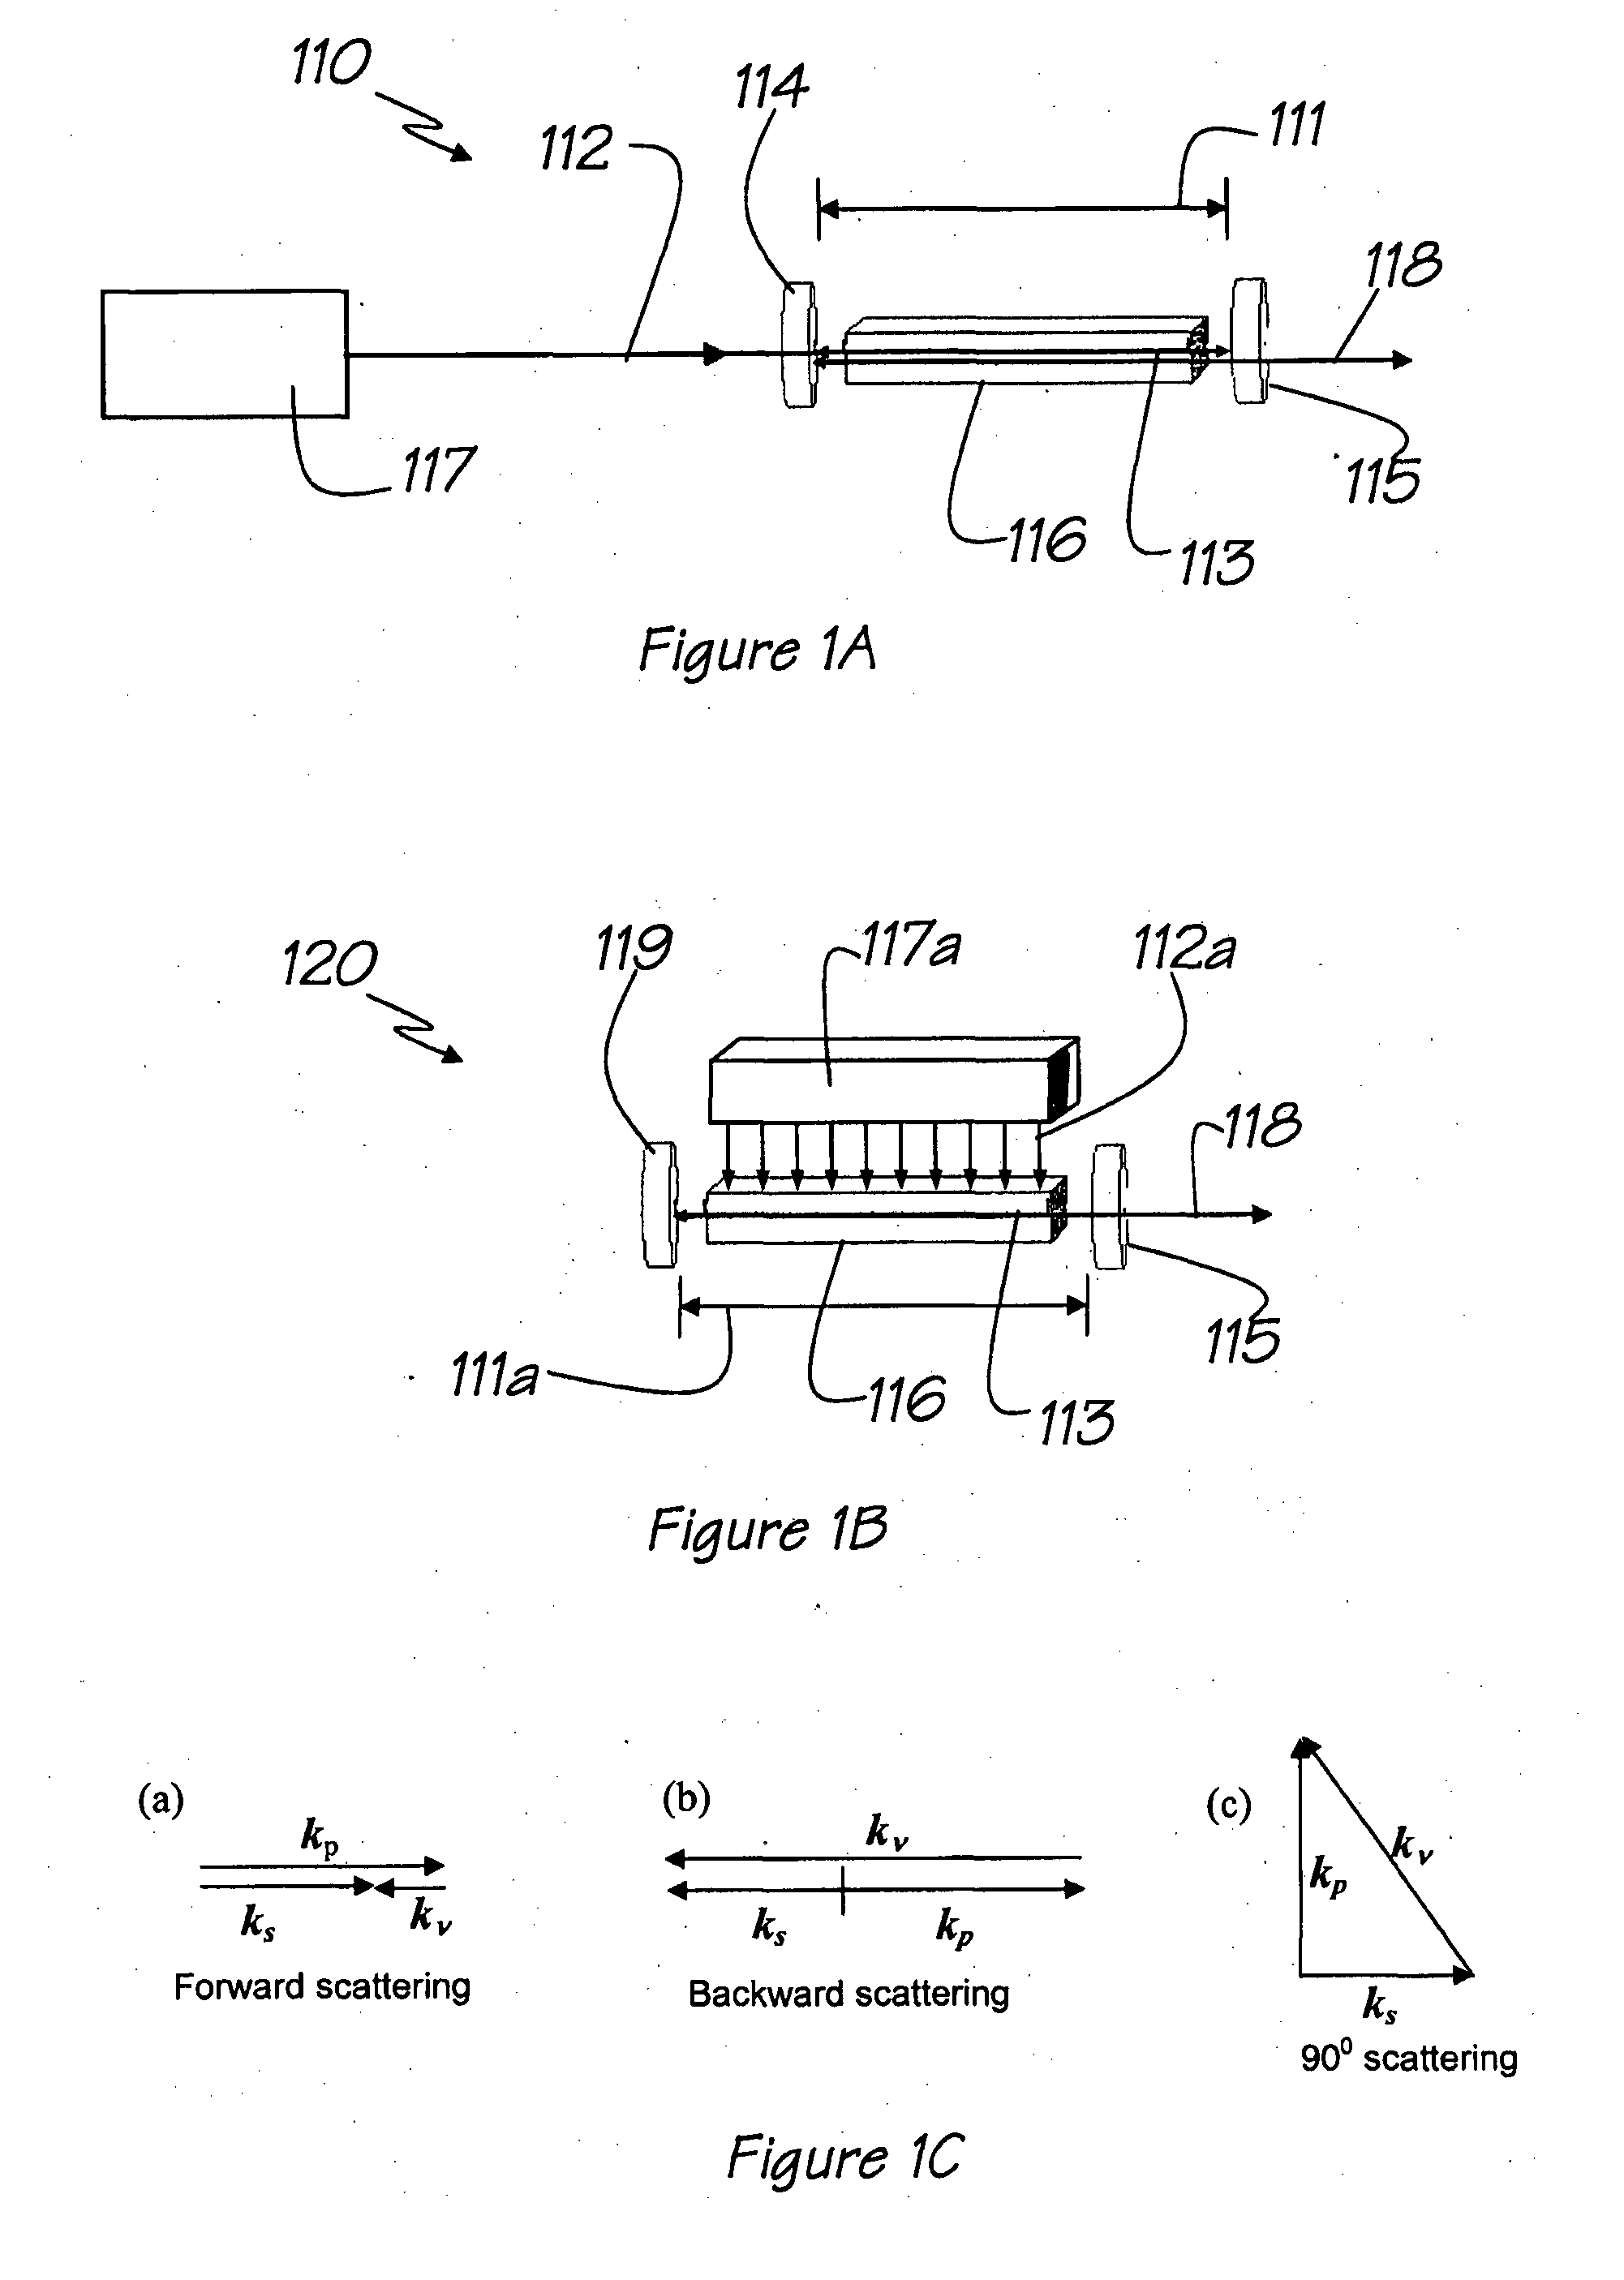 Mid to far infrared diamond raman laser systems and methods